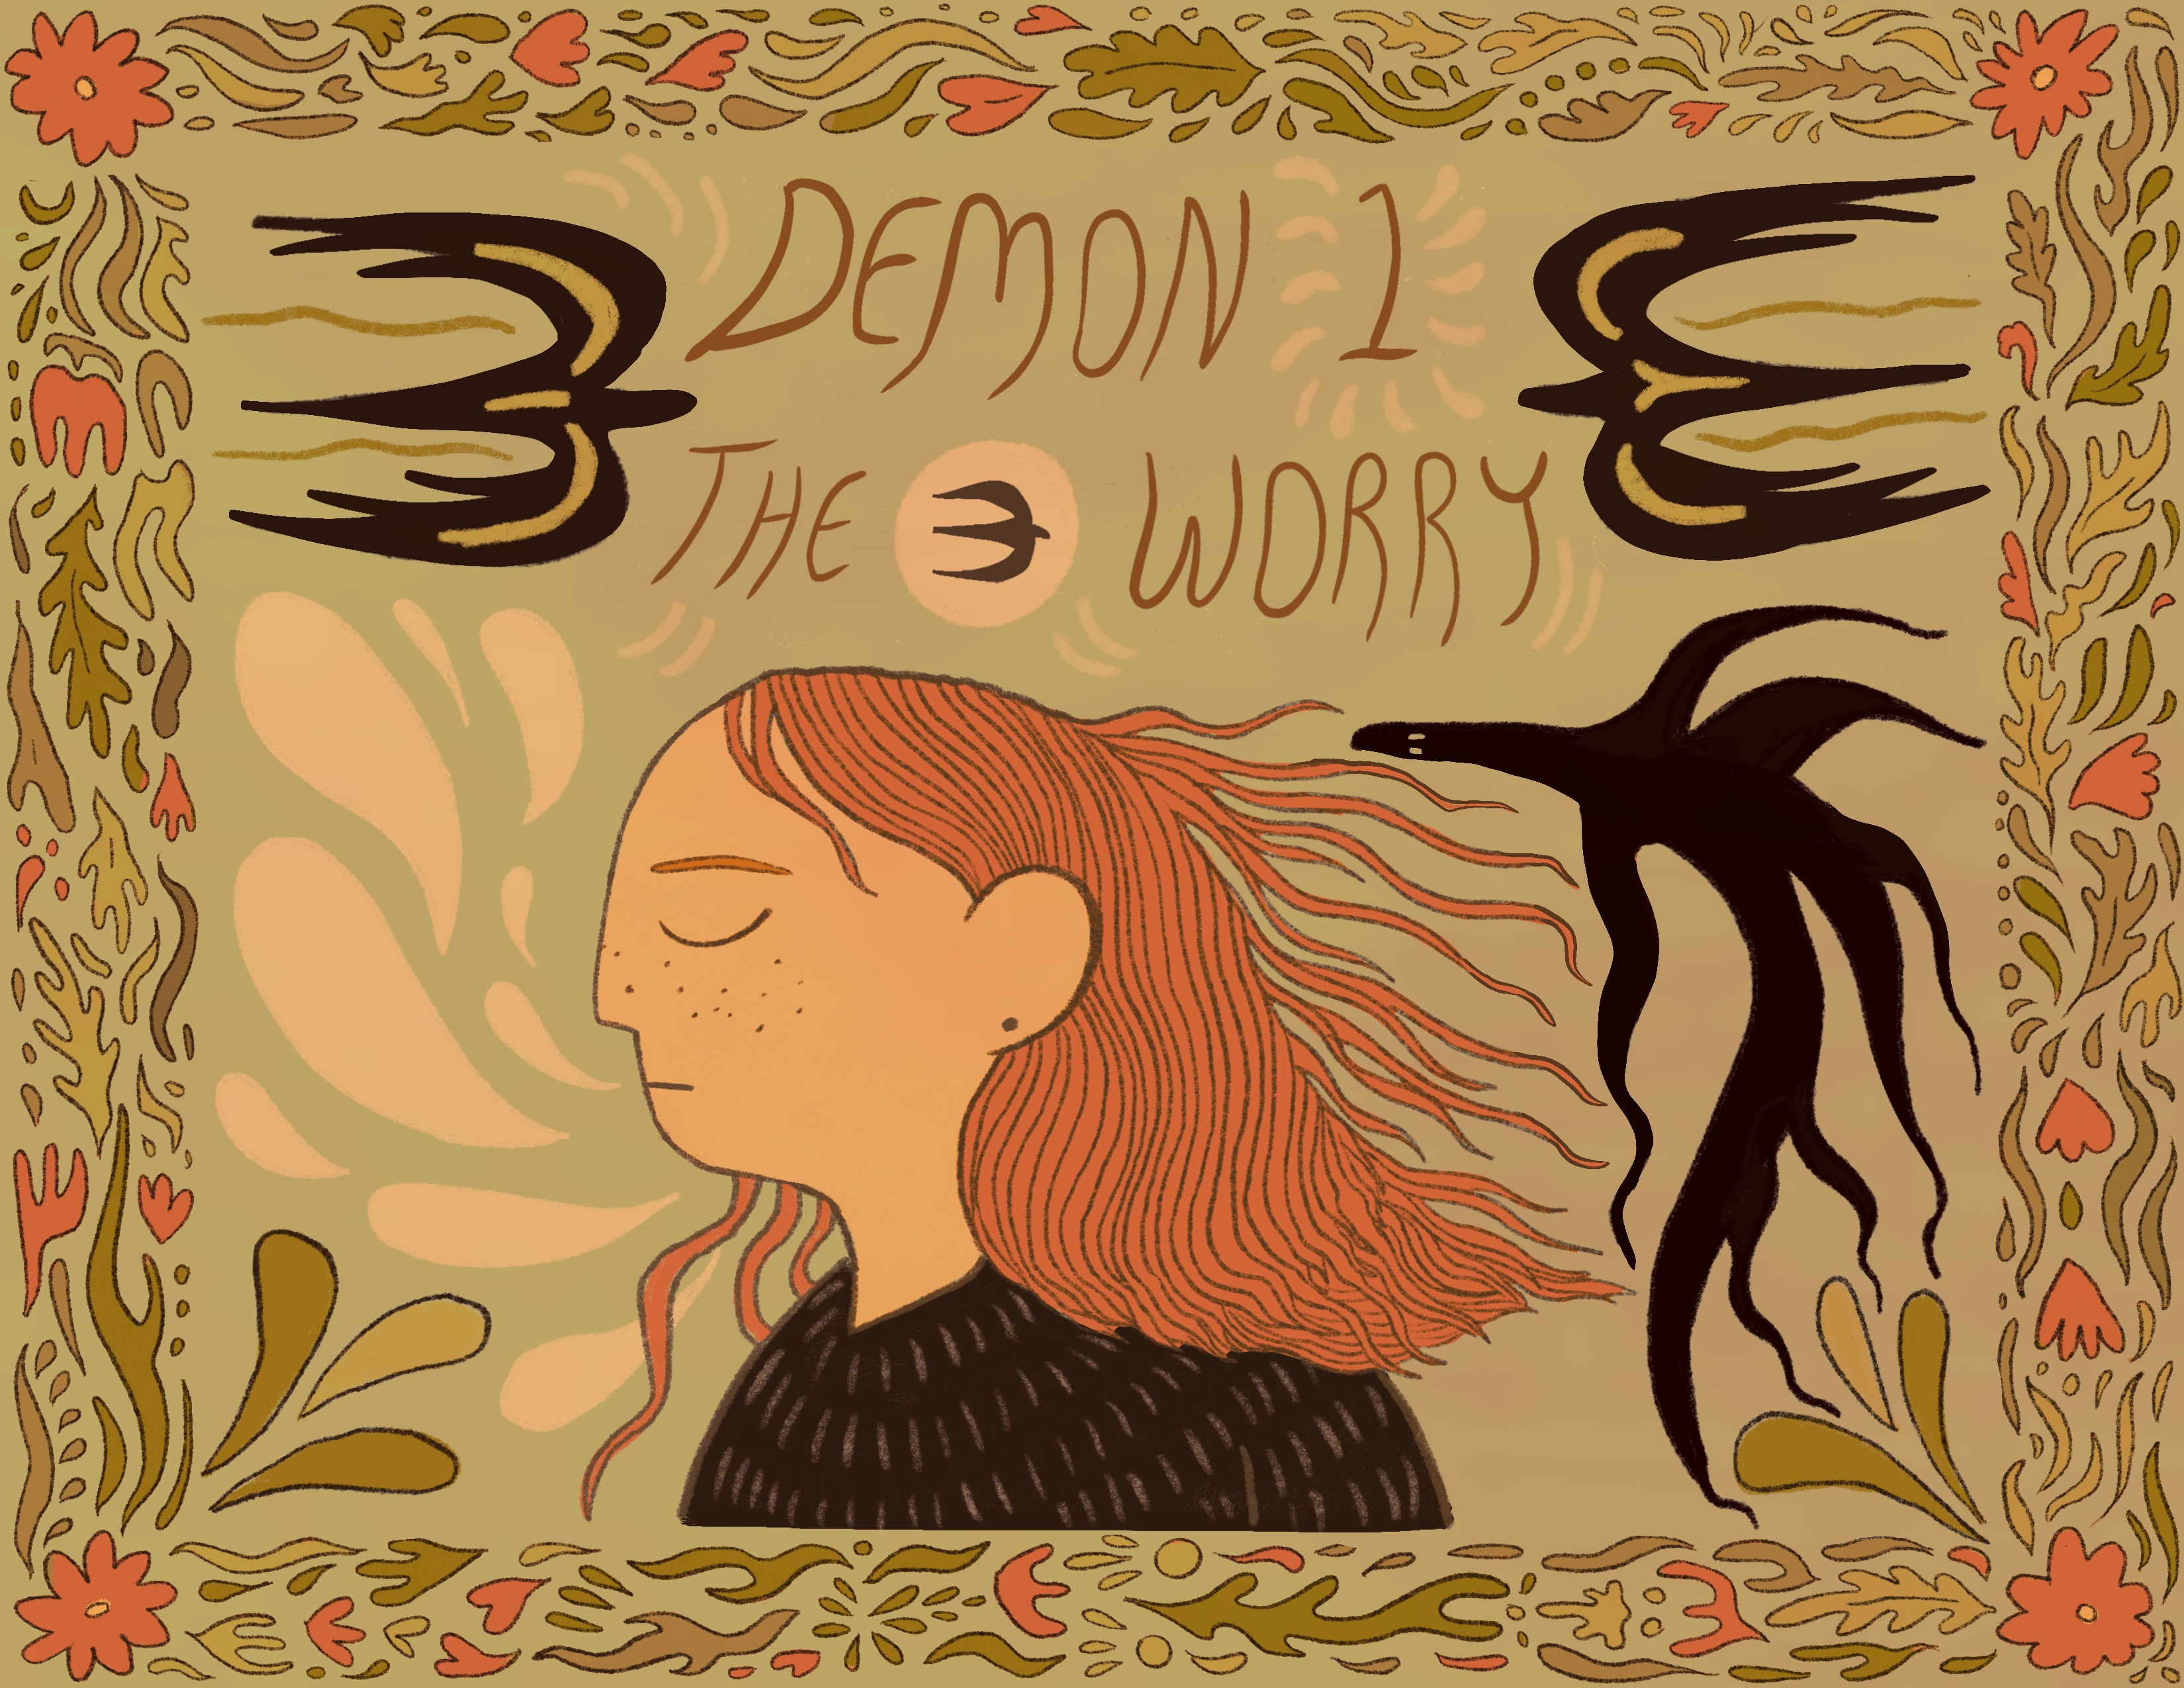 Comic cover. Illustration of a girl with birds and words that say "Demon 1, The Worry"